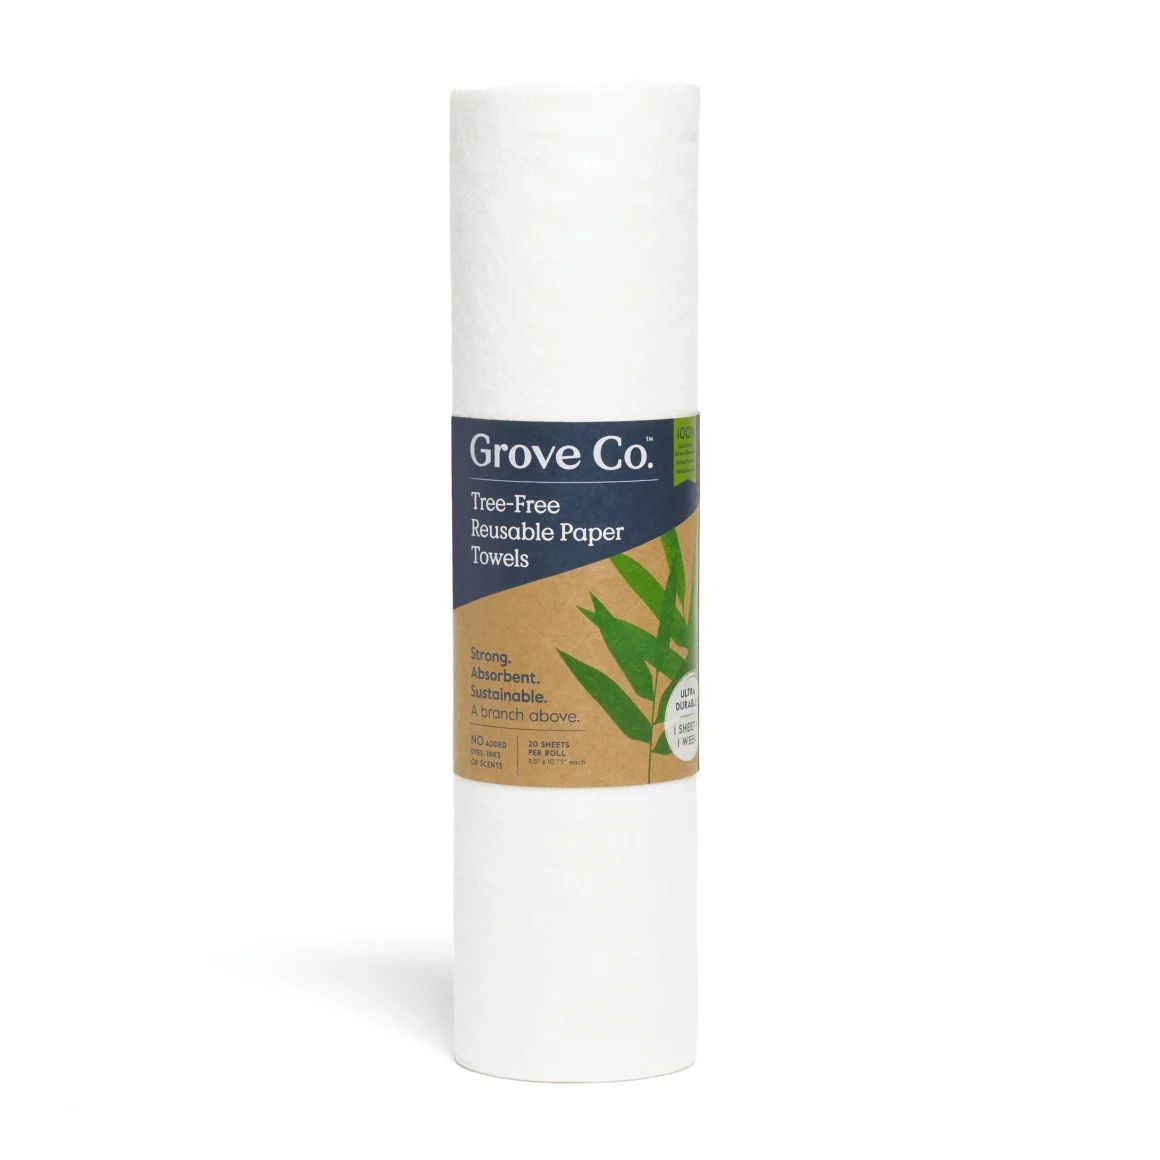 Grove Co. Tree-Free Reusable Paper Towels - 100% Bamboo | Grove